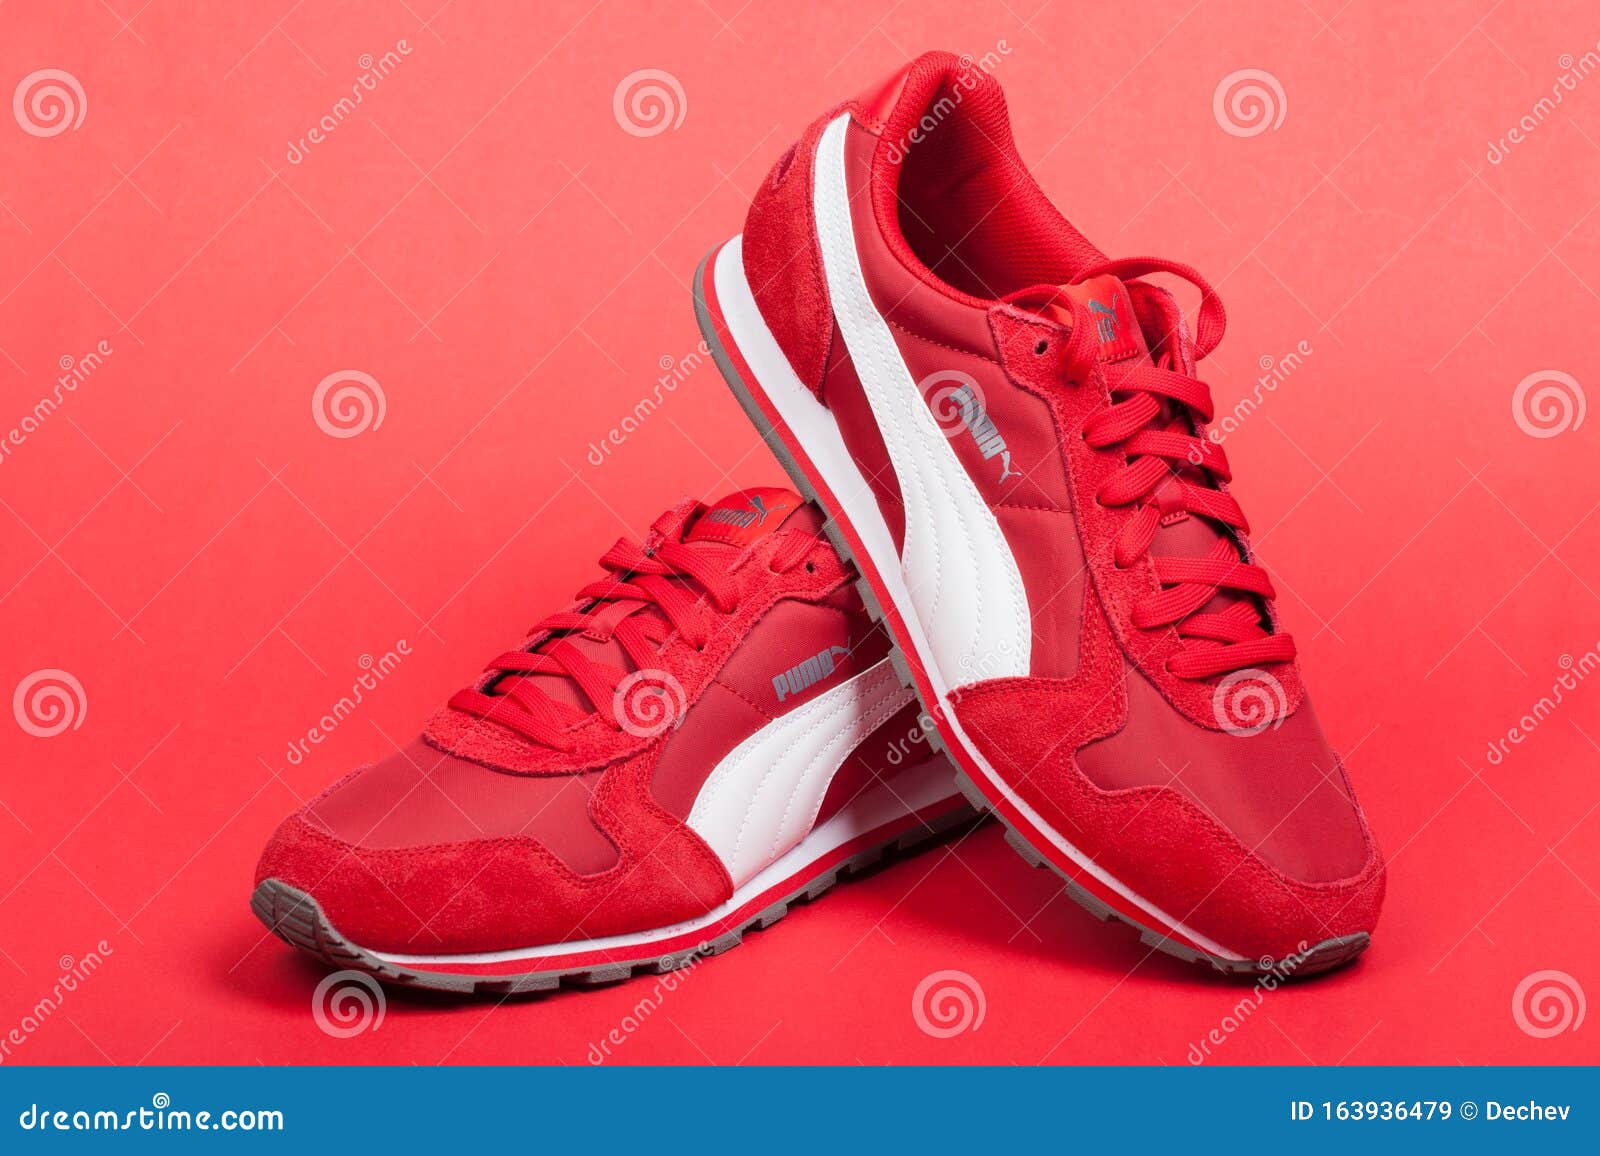 Varna , Bulgaria - JUNE 17, 2017. Red Sport on Red Background. a Major German Multinational Company. Product Shot Editorial Stock Image - Image of company, 163936479